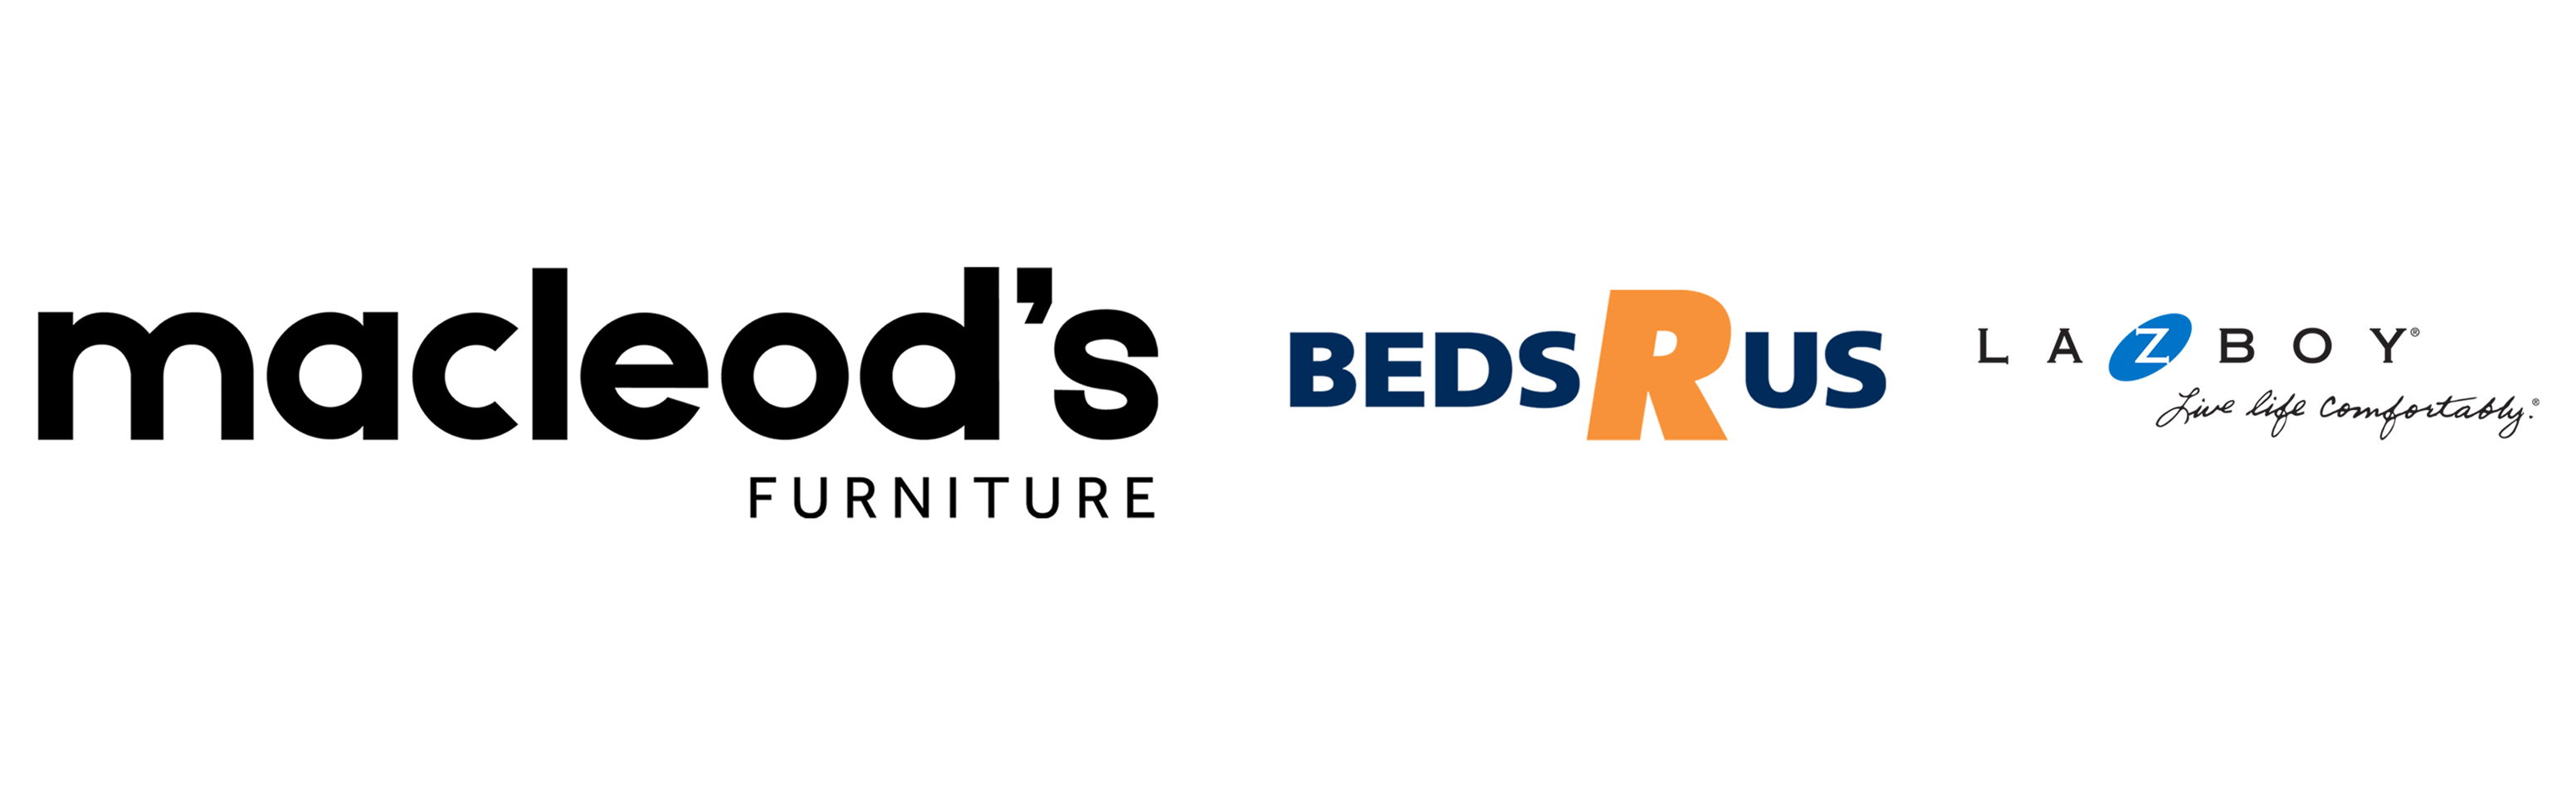 Macleod's Furniture Court & Beds R Us